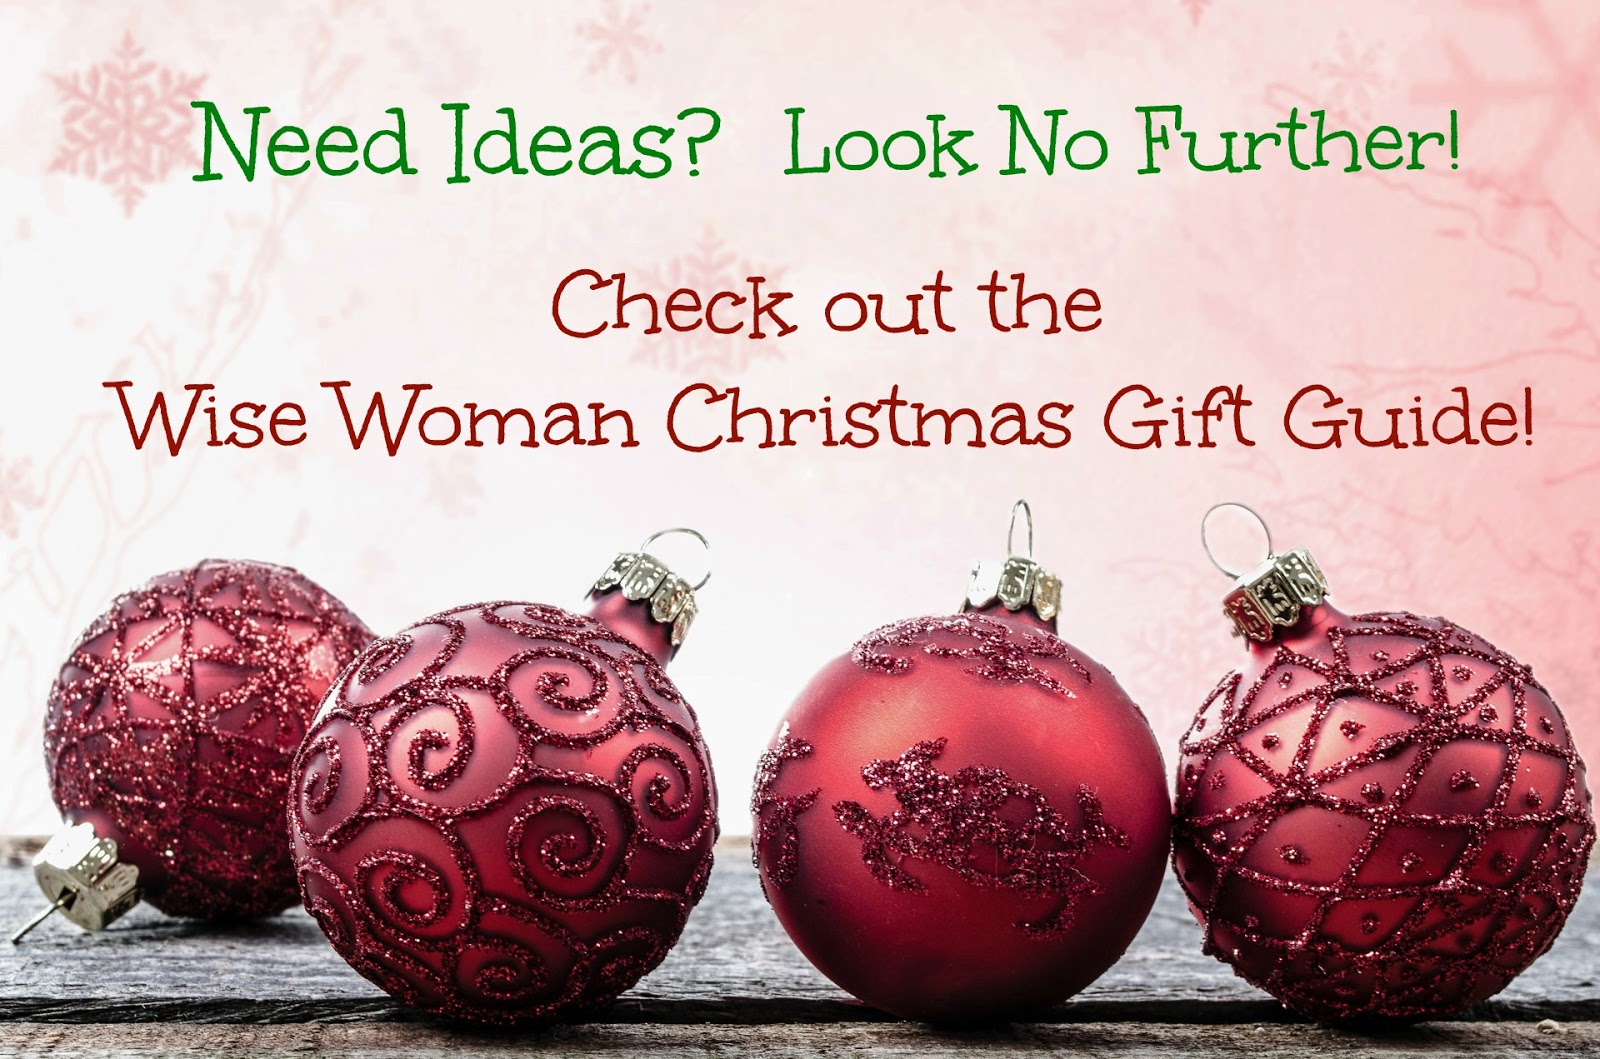 http://proverbs14verse1.blogspot.com/2014/11/its-here-wise-woman-christmas-gift.html